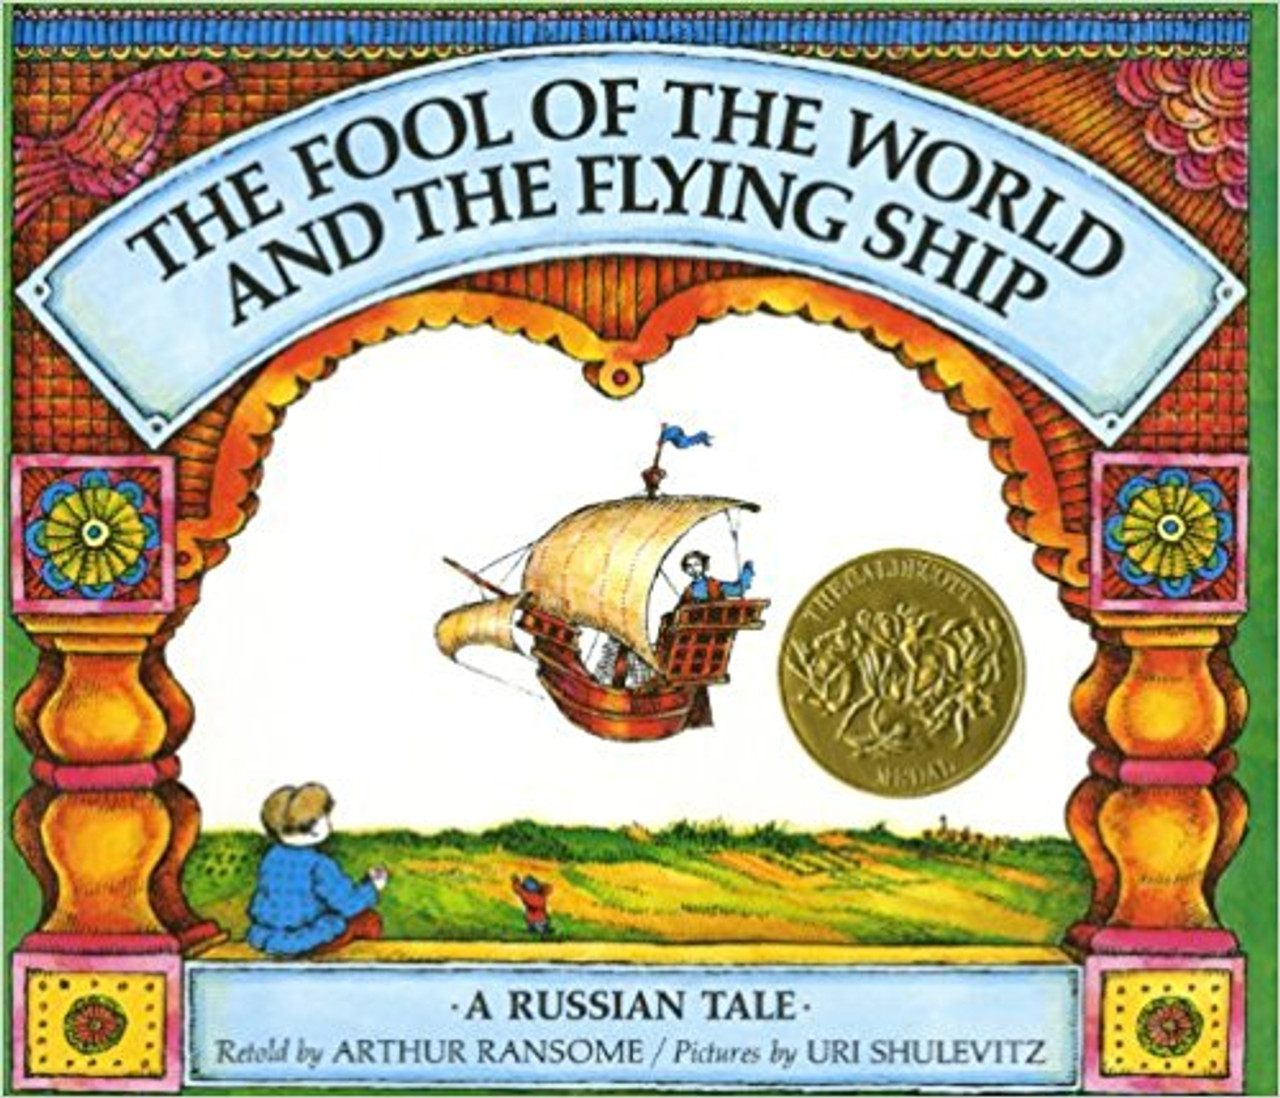 The Fool of the World and the Flying Ship by Valeri Gorbaachev